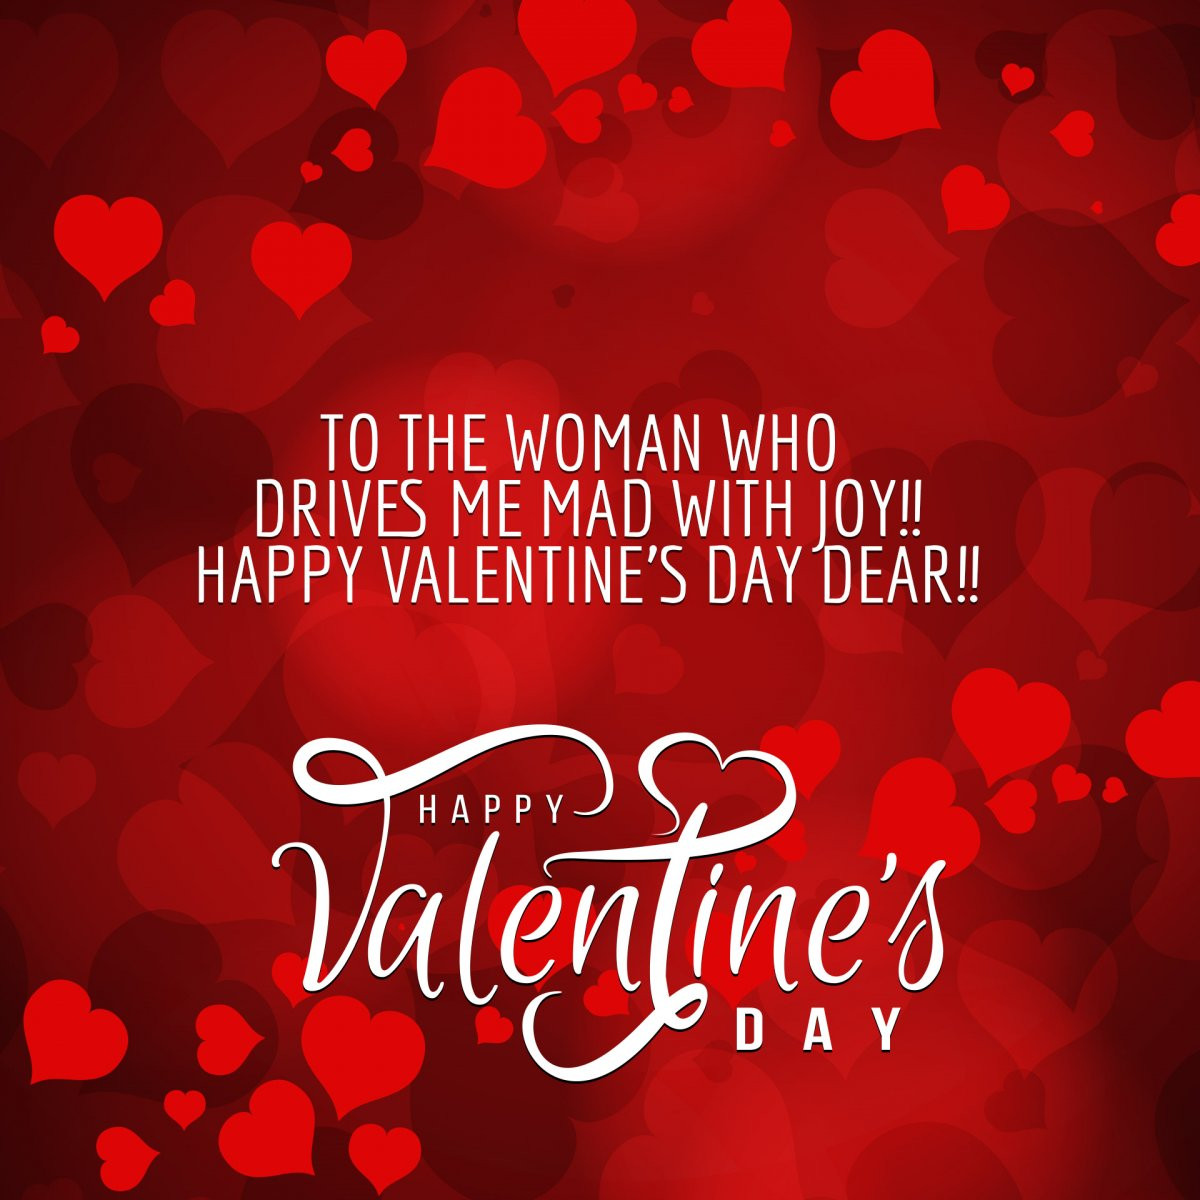 Love Quotes For Valentines Day
 Cute Happy Valentine’s Day 2019 Wishes Messages and Love